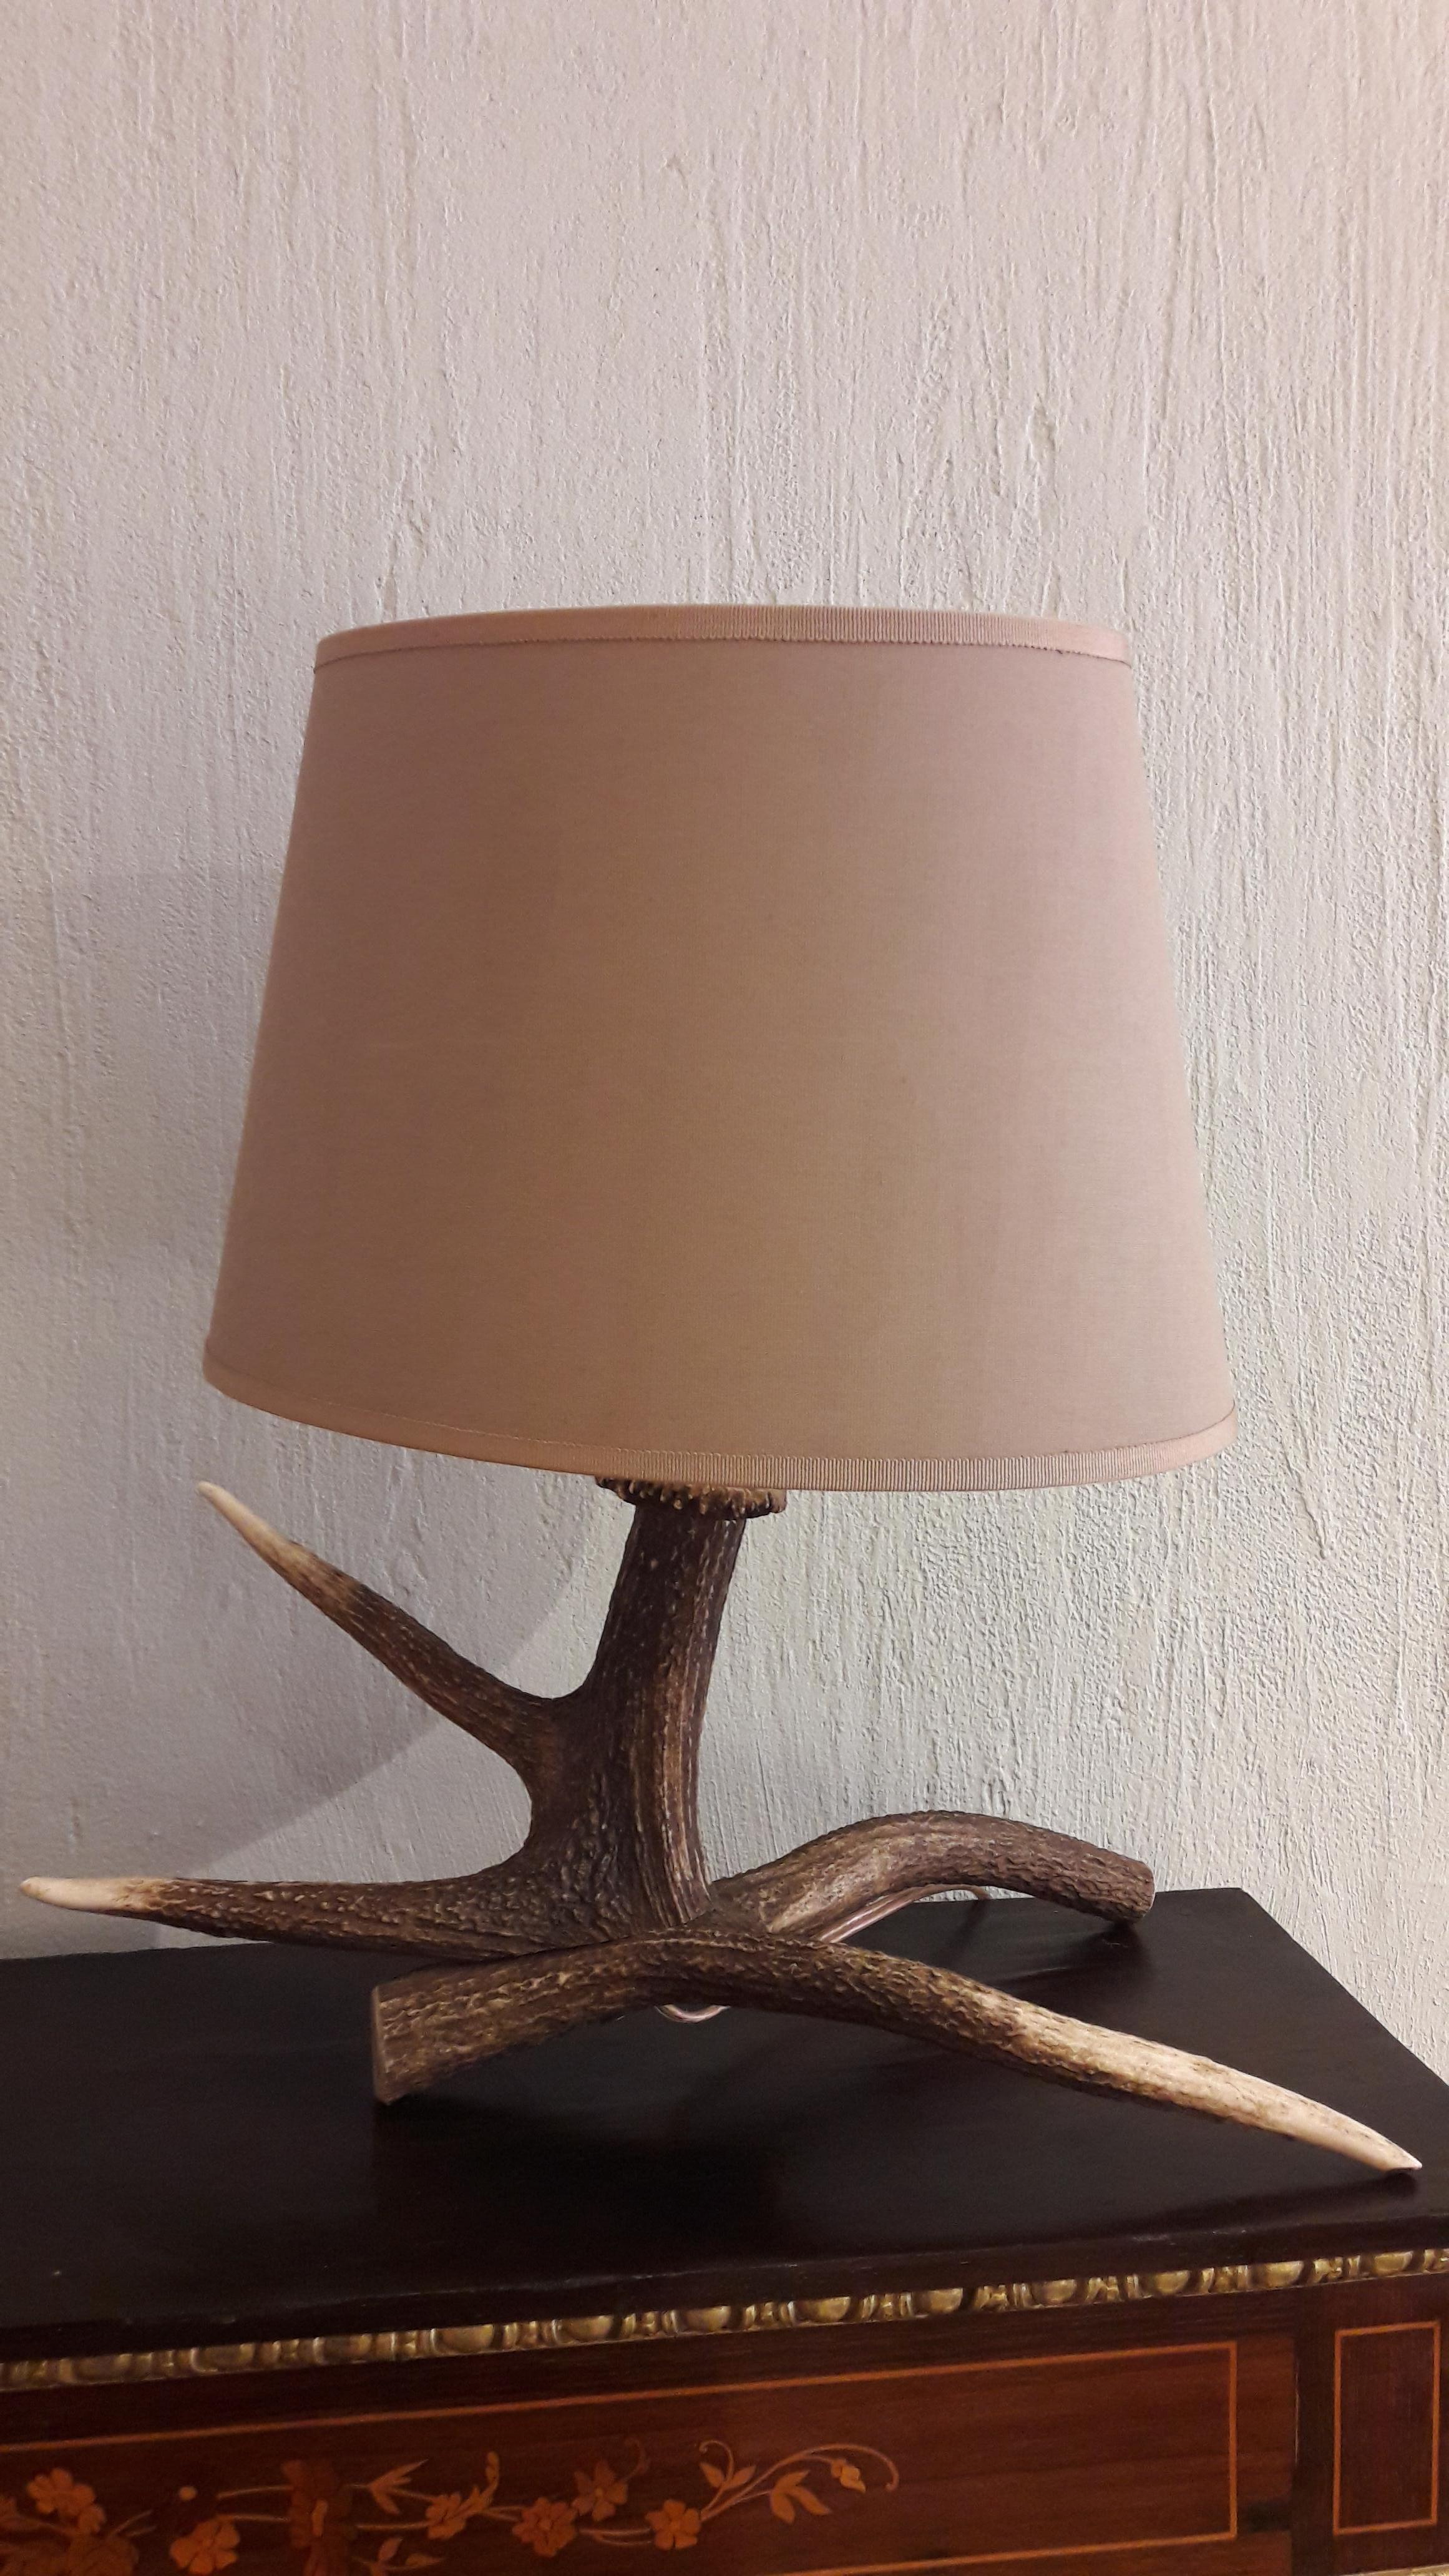 Decorative lamp of a deer horn with lamp shade.